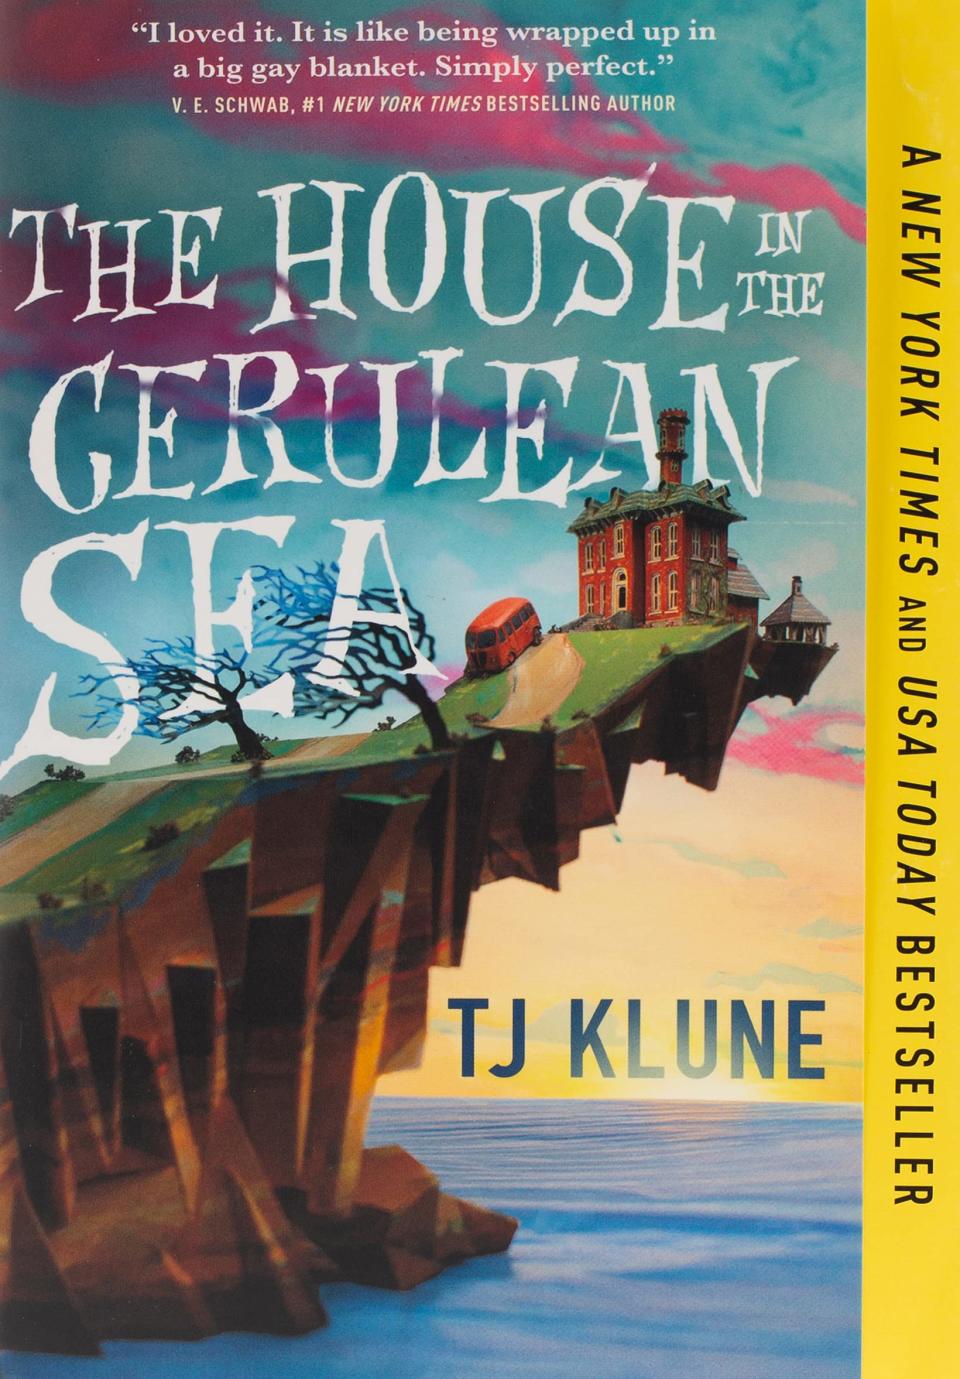 "The House in the Cerulean Sea"